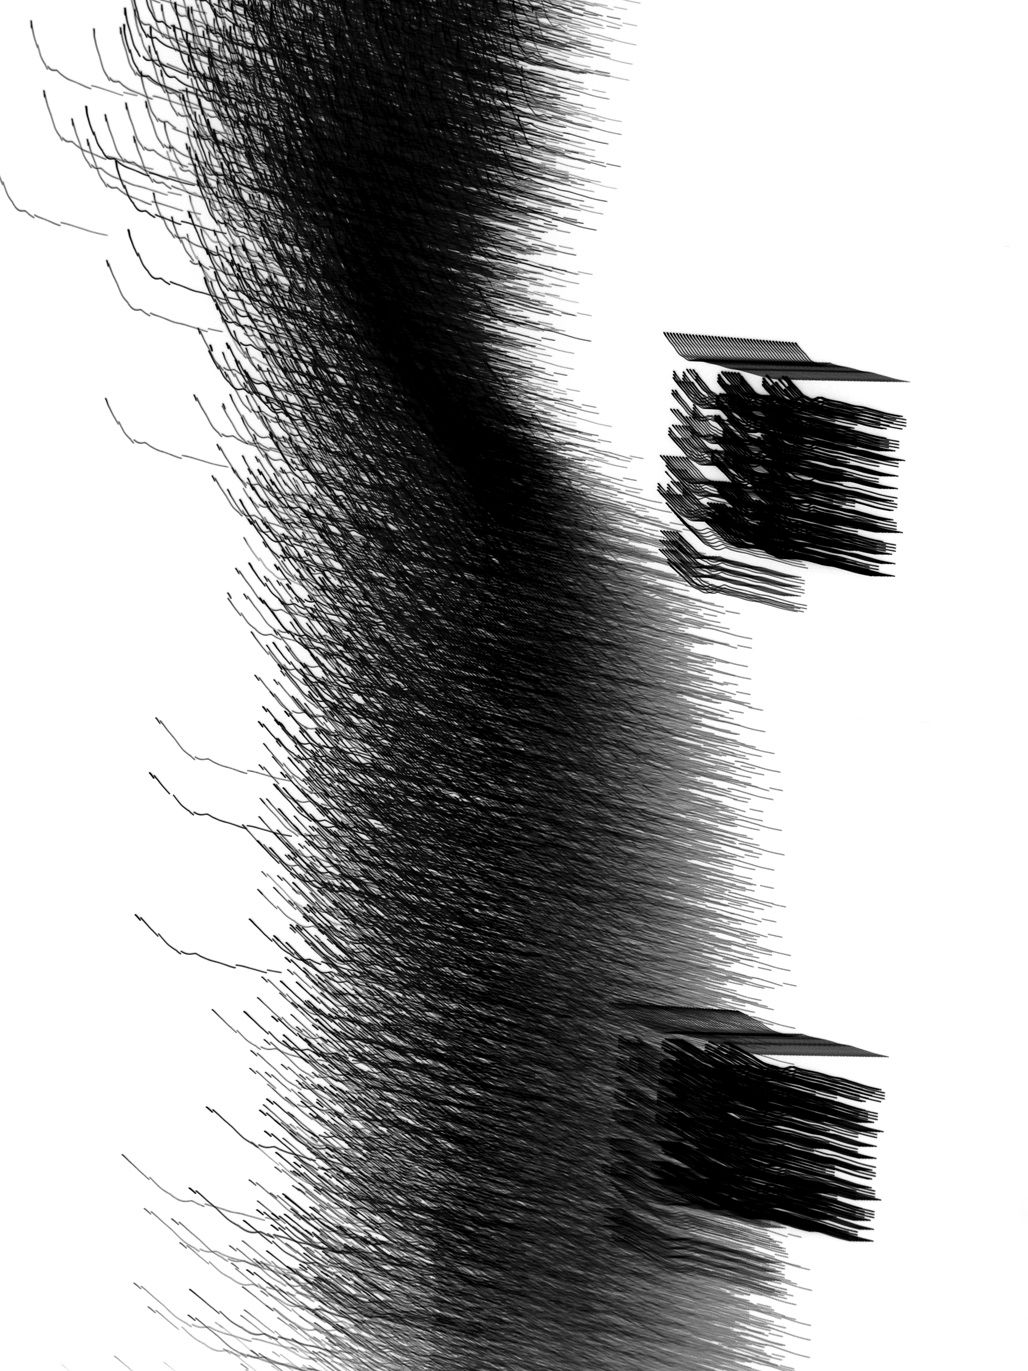 Untitled-IBM, 2011, Black and White Abstract Photography, Shirine Gill